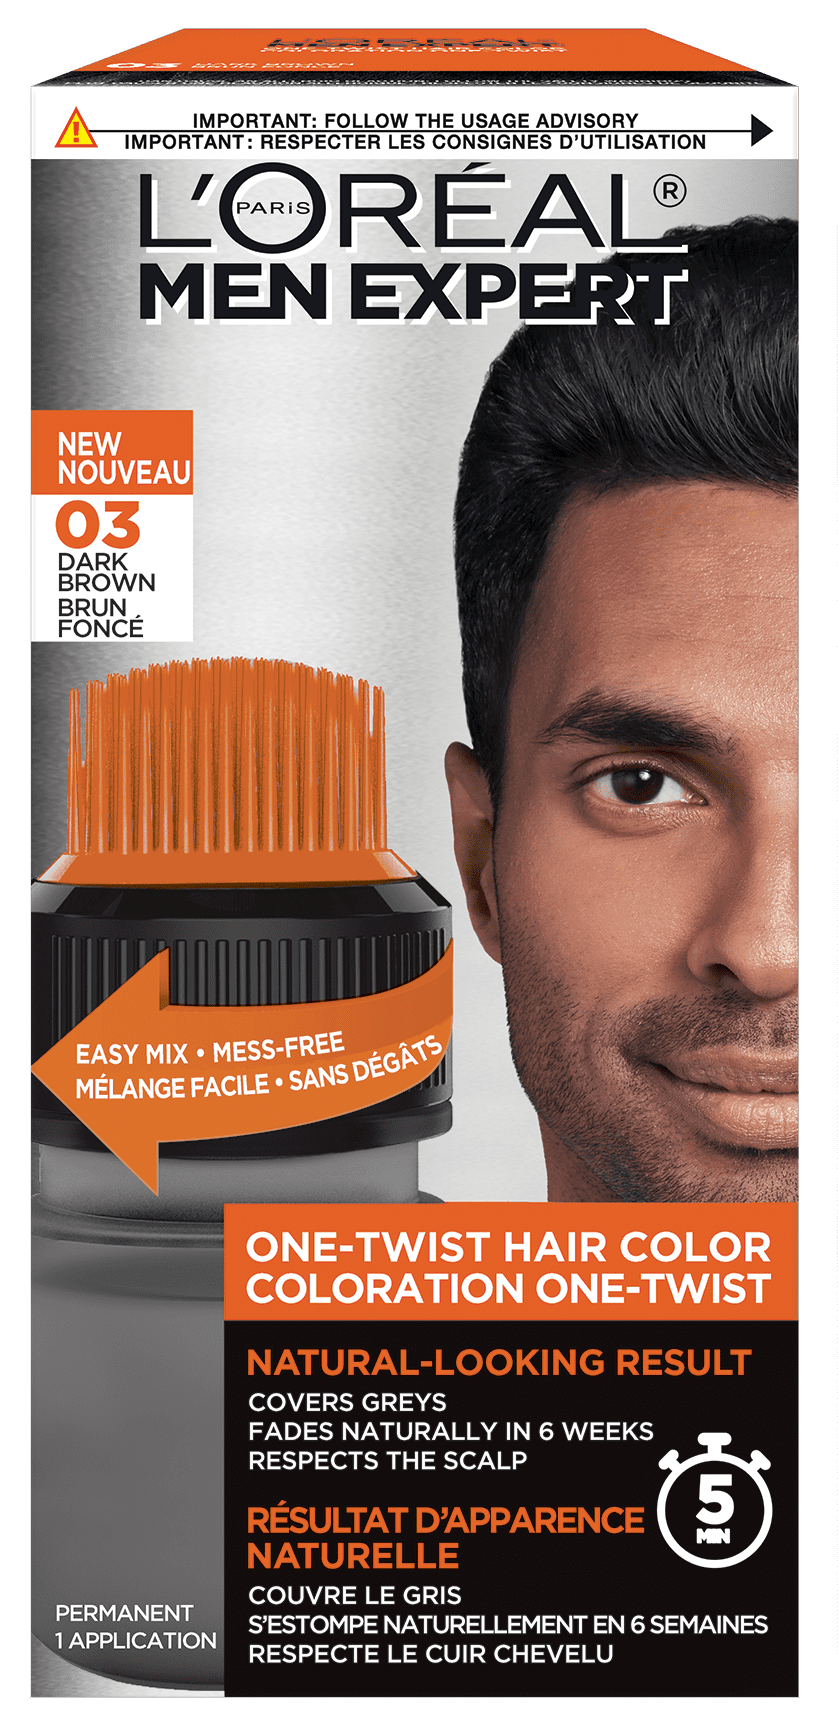 Colour your hair with the ammonia-free semi-permanent hair dye One Twist  for men by L'Oréal Paris, cover grey hair & quickly get a natural looking  result.